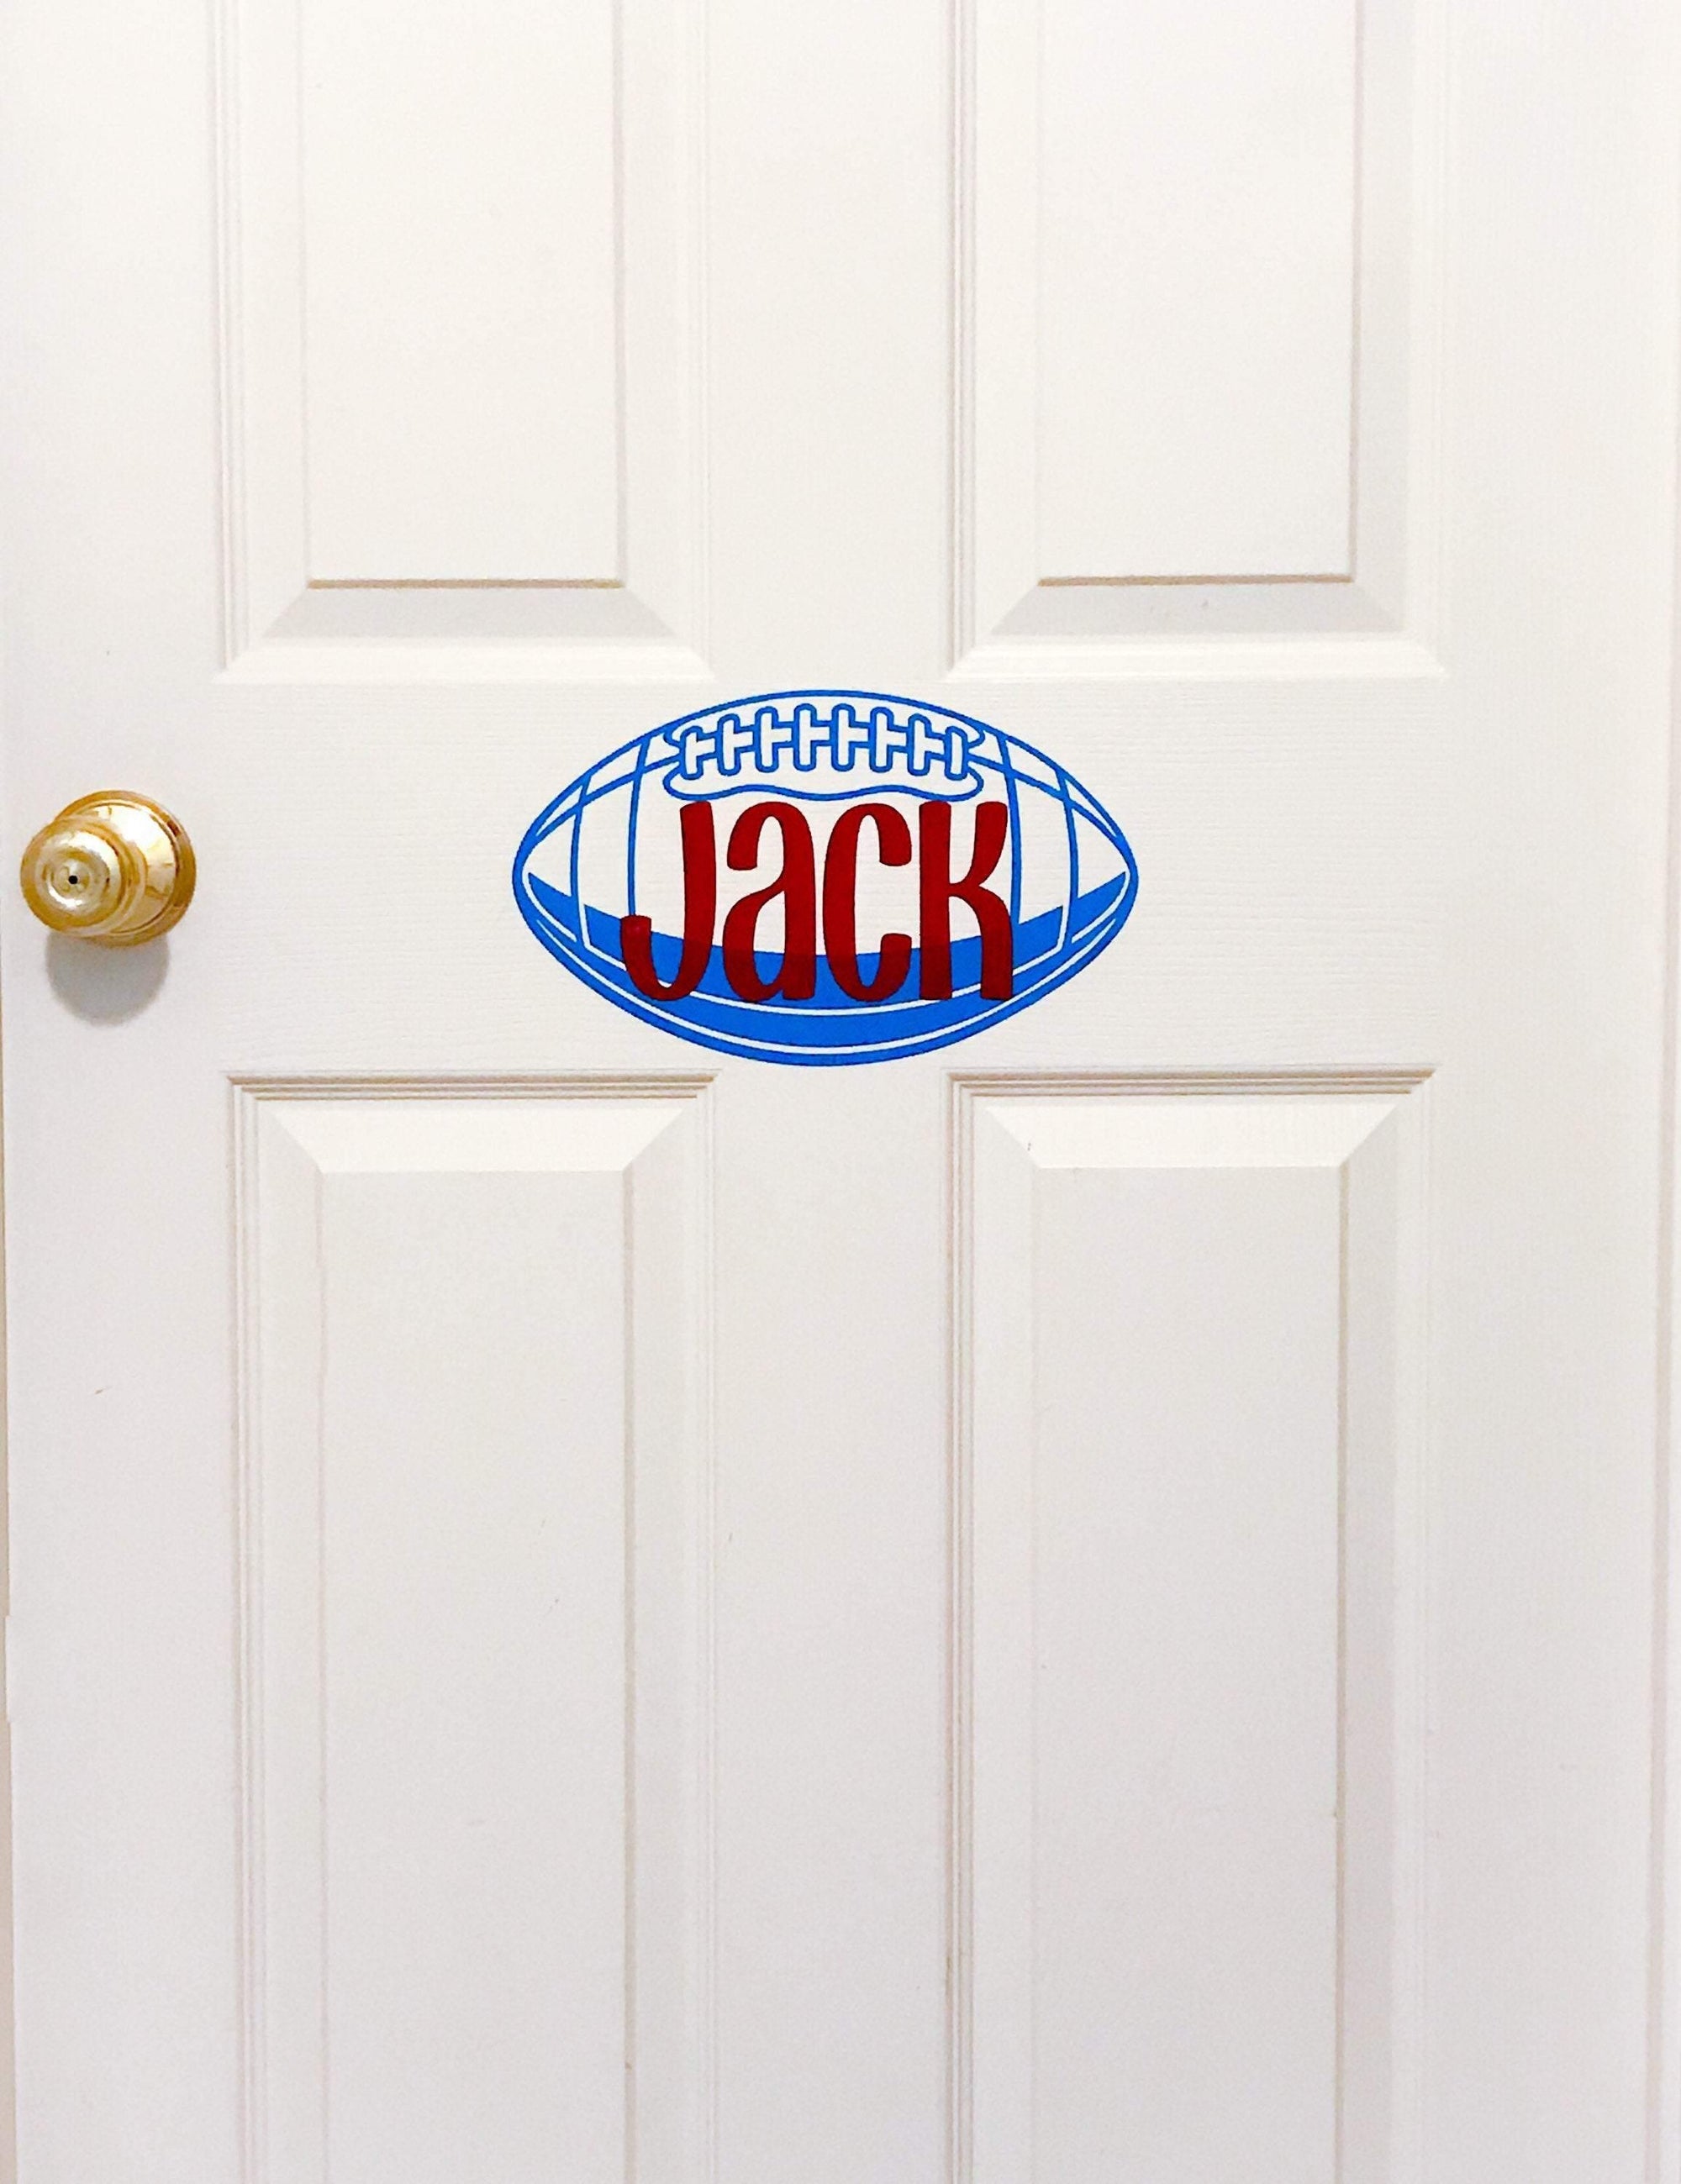 Door Decal | Personalized Vinyl Decal | Monogram Vinyl Decal | Football Decal - This & That Solutions - Door Decal | Personalized Vinyl Decal | Monogram Vinyl Decal | Football Decal - Personalized Gifts & Custom Home Decor